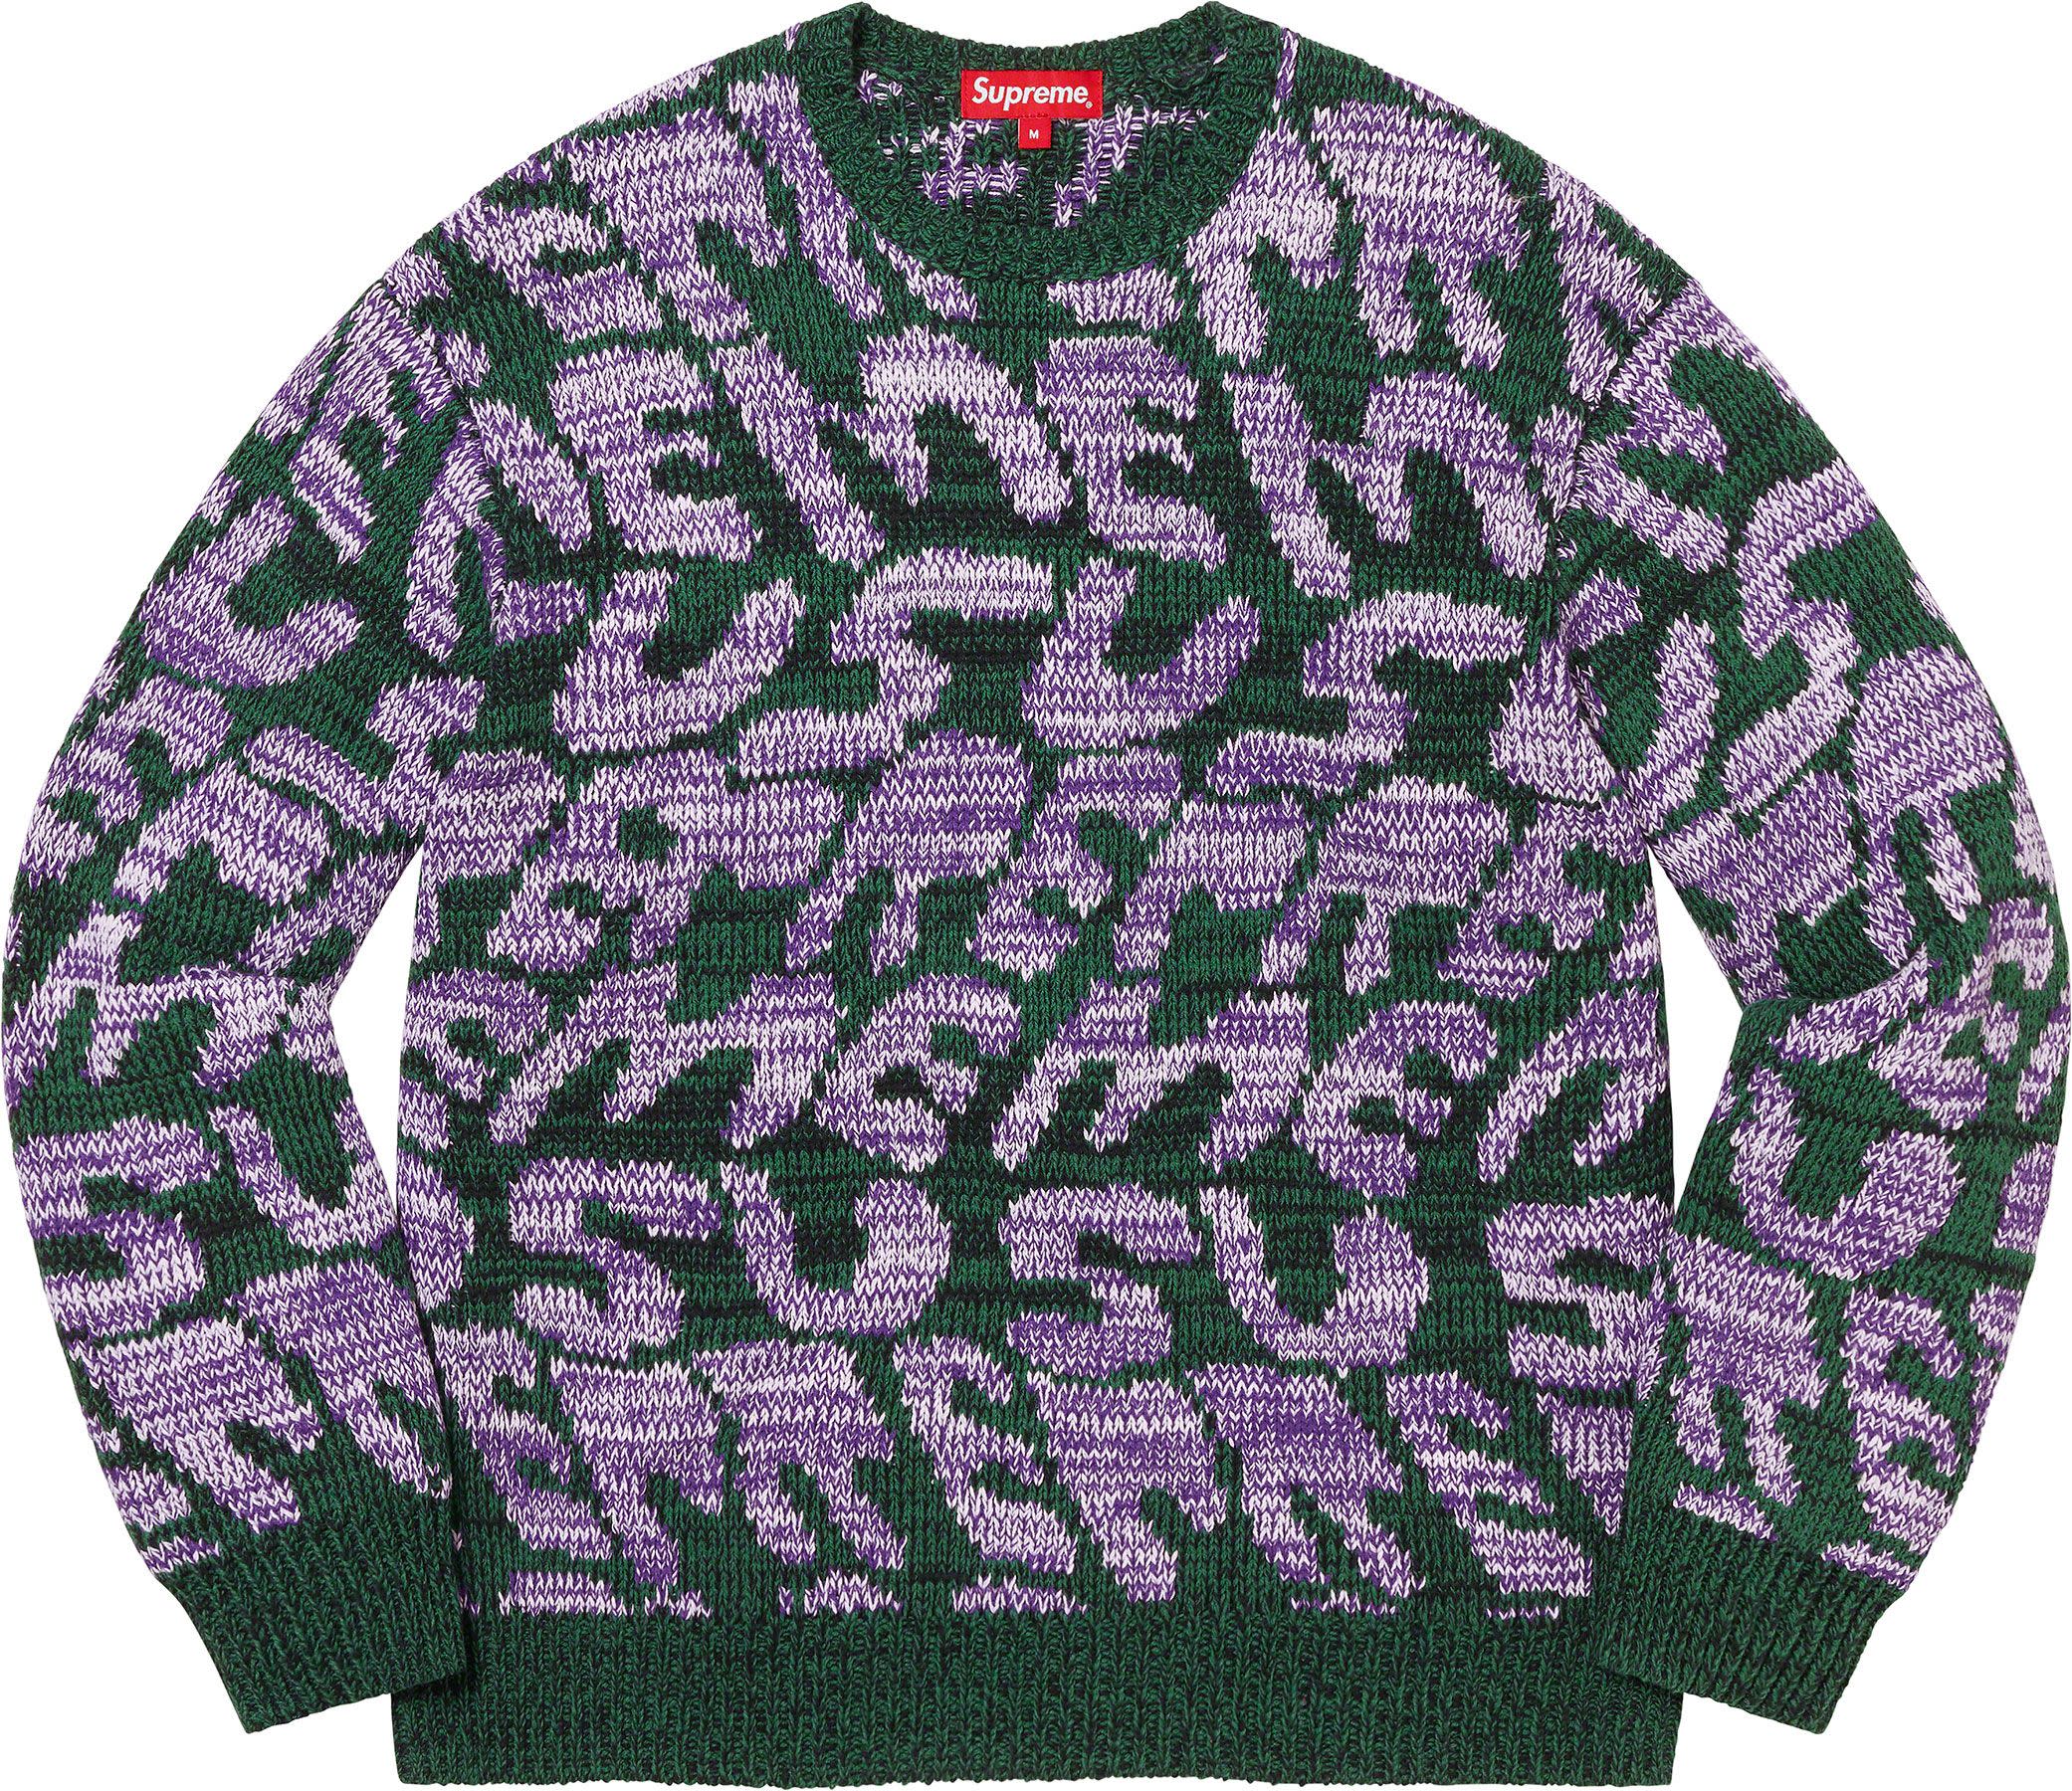 Supreme STACKED SWEATER | Supreme - SLN Official